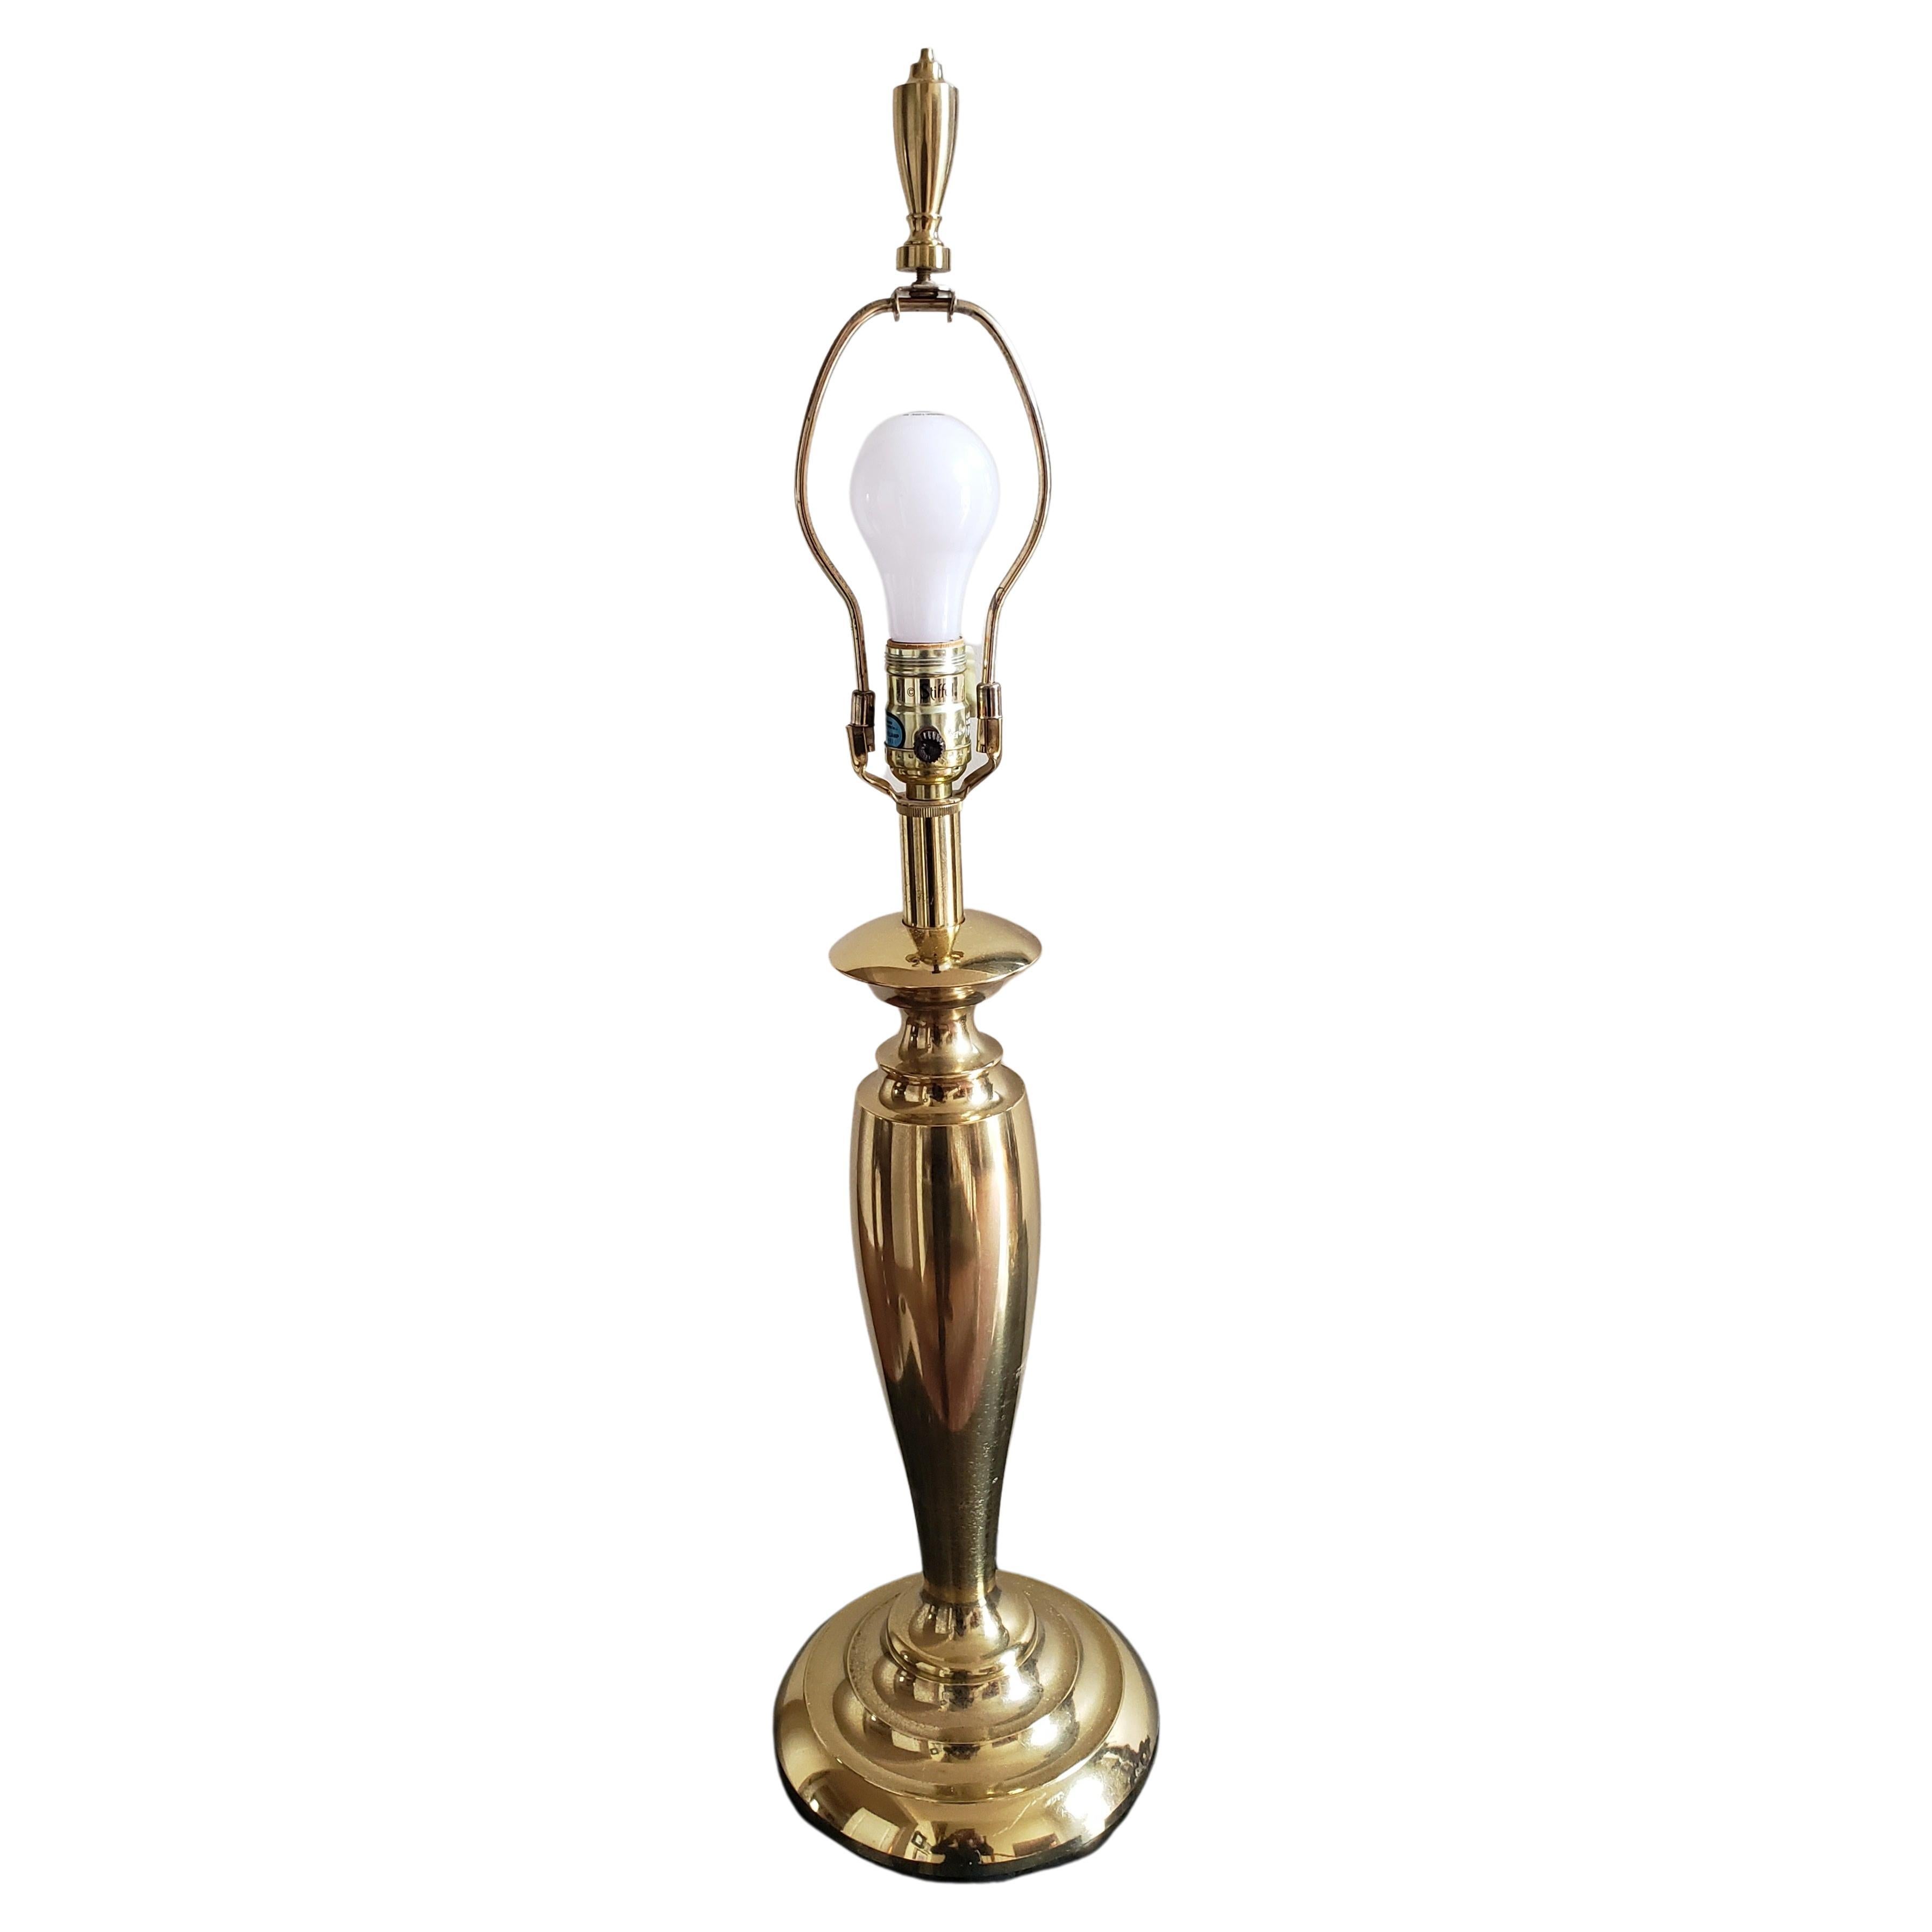 Vintage Stiffel Solid Brass Hollywood Regency Table Lamp In Good Condition For Sale In Germantown, MD